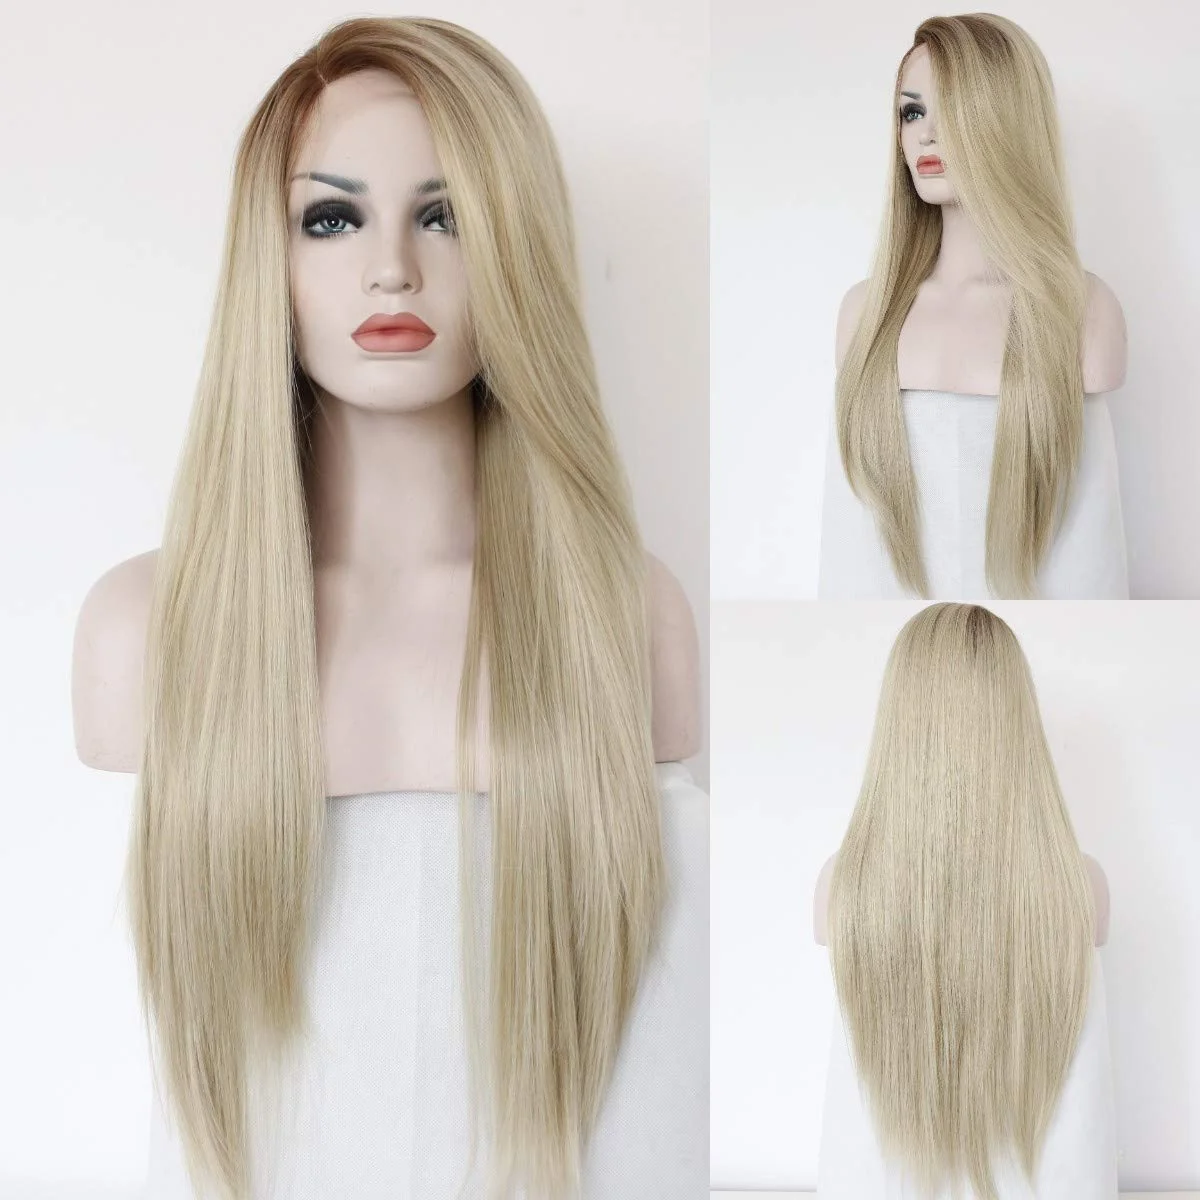 Kryssma Synthetic Lace Front Wig Straight Lace Front Wigs For Women Ombre Lace Front Wig Blonde Wig Heat Temperature Cosplay Wig